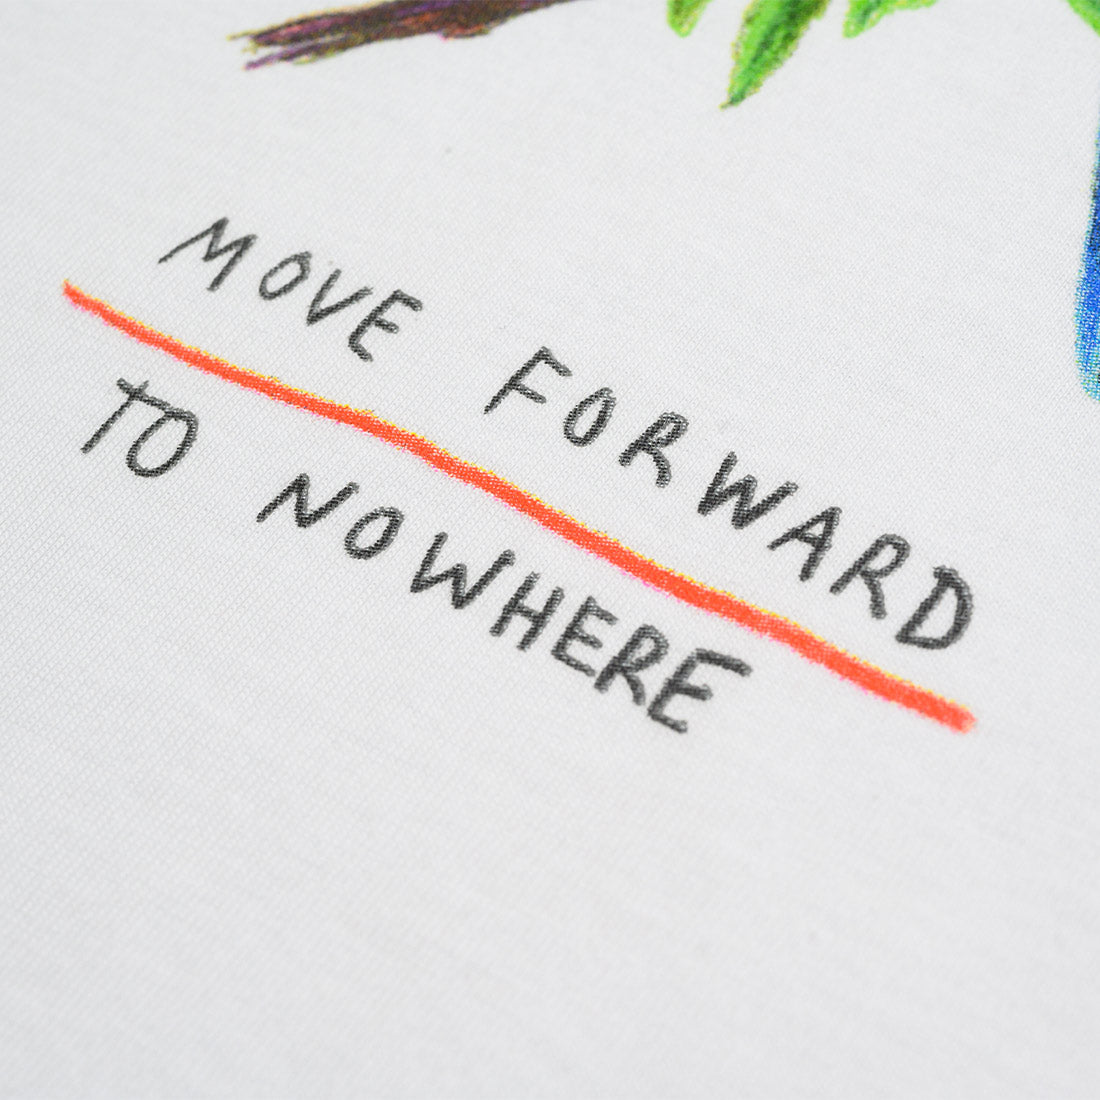 WES LANG AND BAIT MEN MOVE FORWARD TO NOWHERE TEE (WHITE)